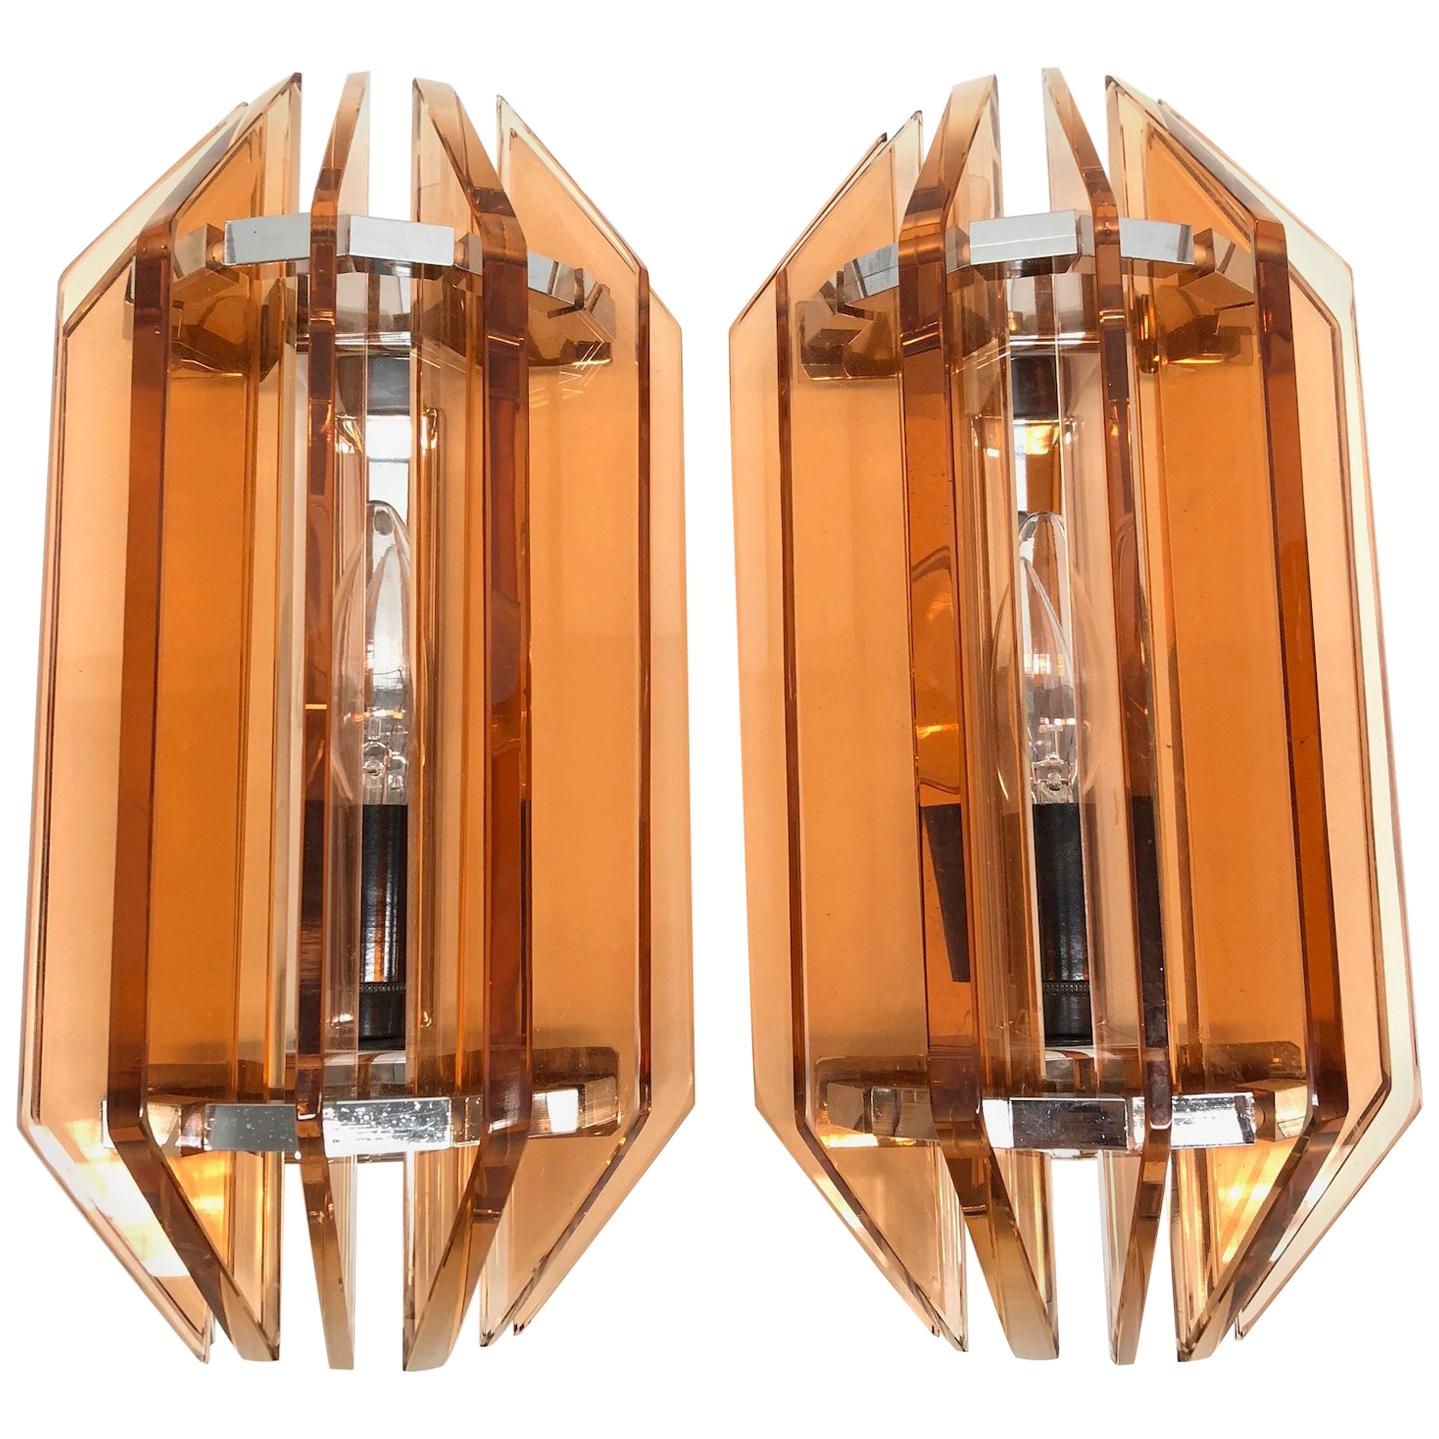 Pair of Mid-Century Modern Sconces Veca, Chrome and Glass Vintage, Italy, 1970s